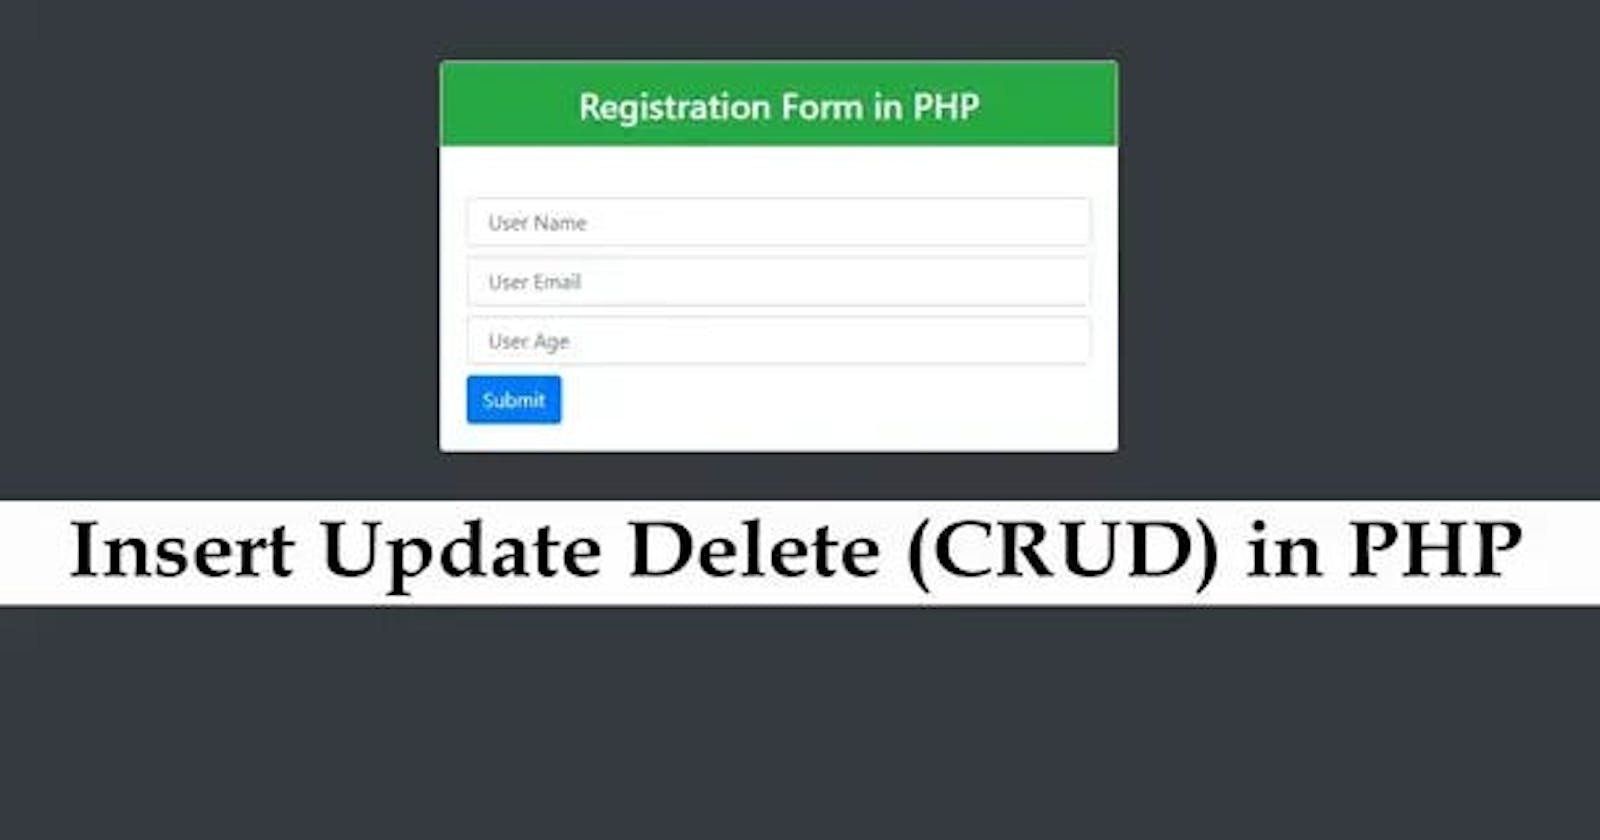 How to Insert Update Delete View in PHP